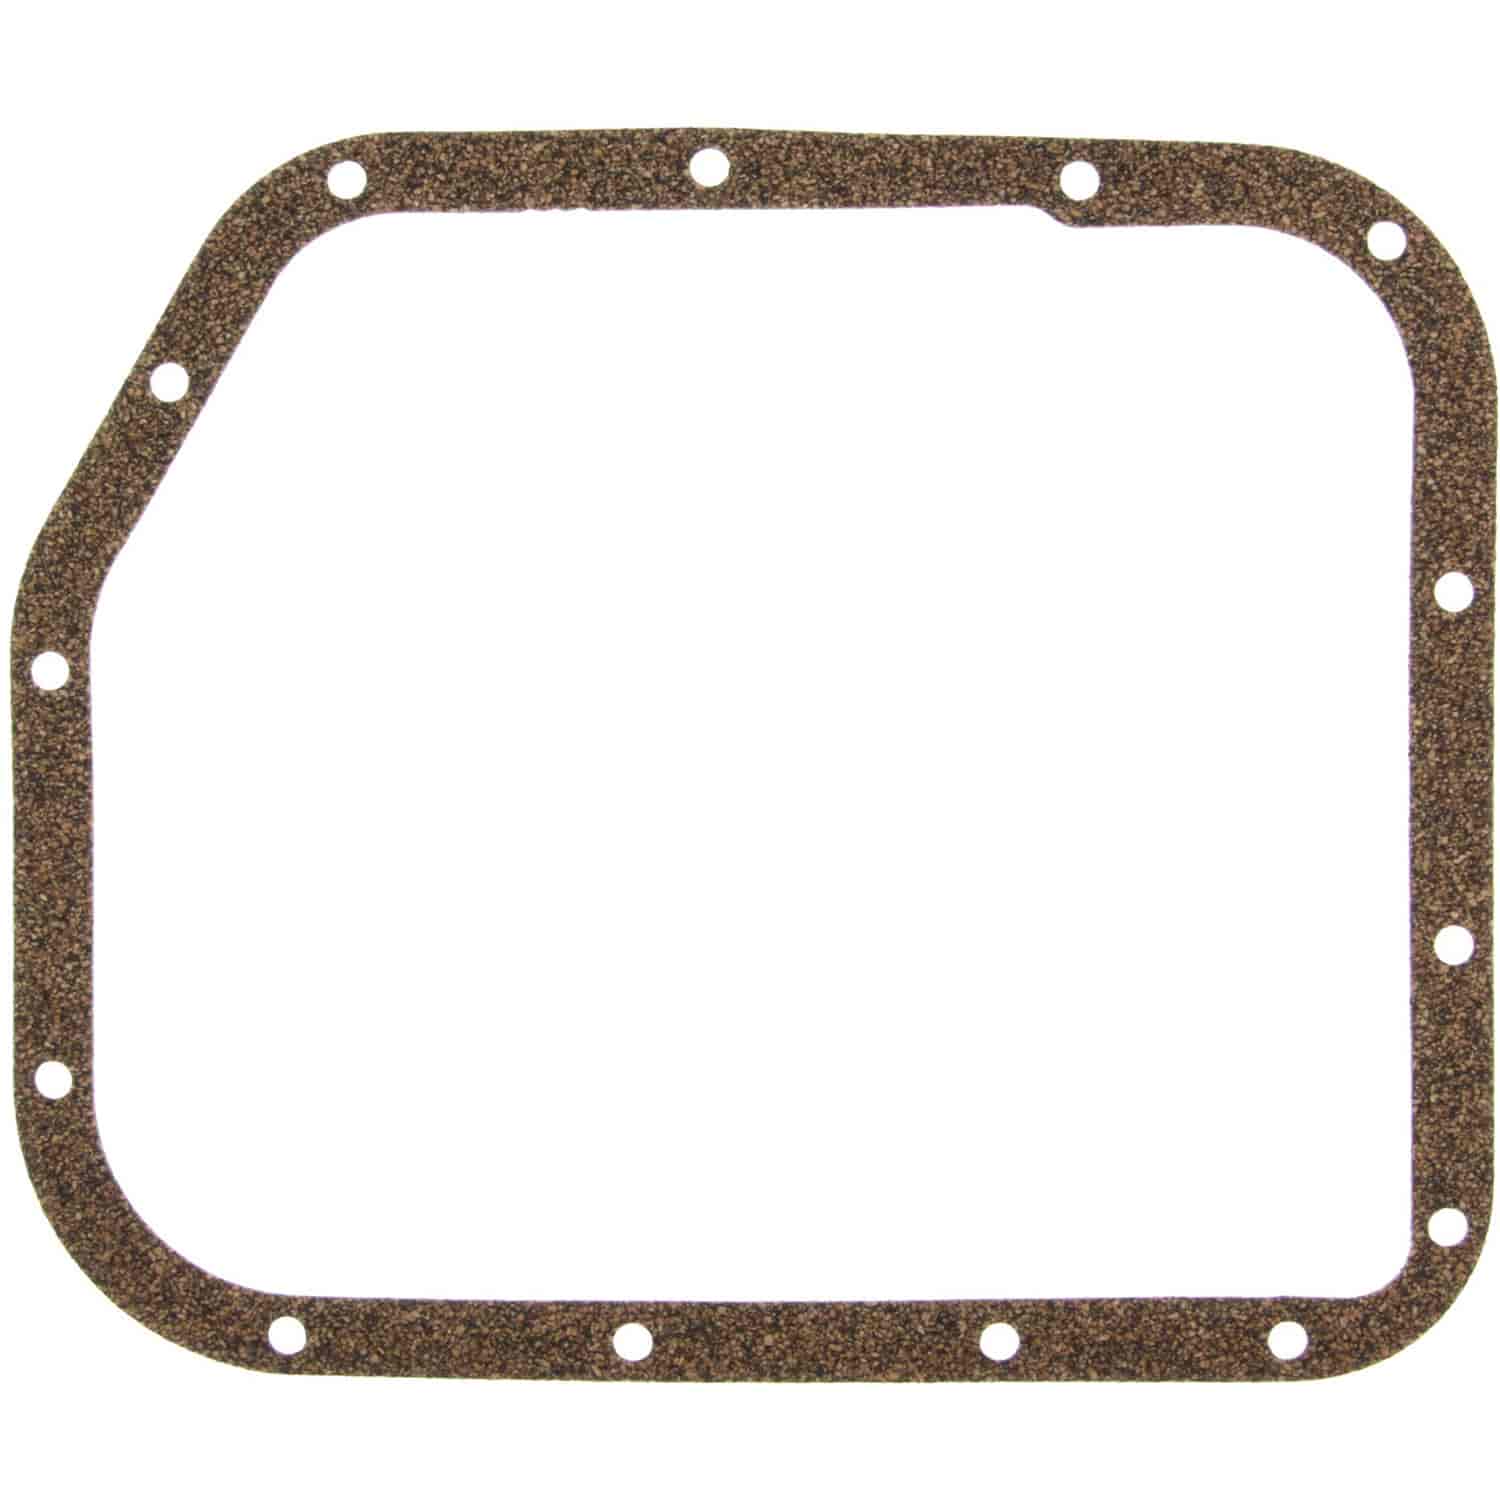 Automatic Transmission Gasket 1962-2006 Chrysler A904/A998/A999 in Cork-Rubber